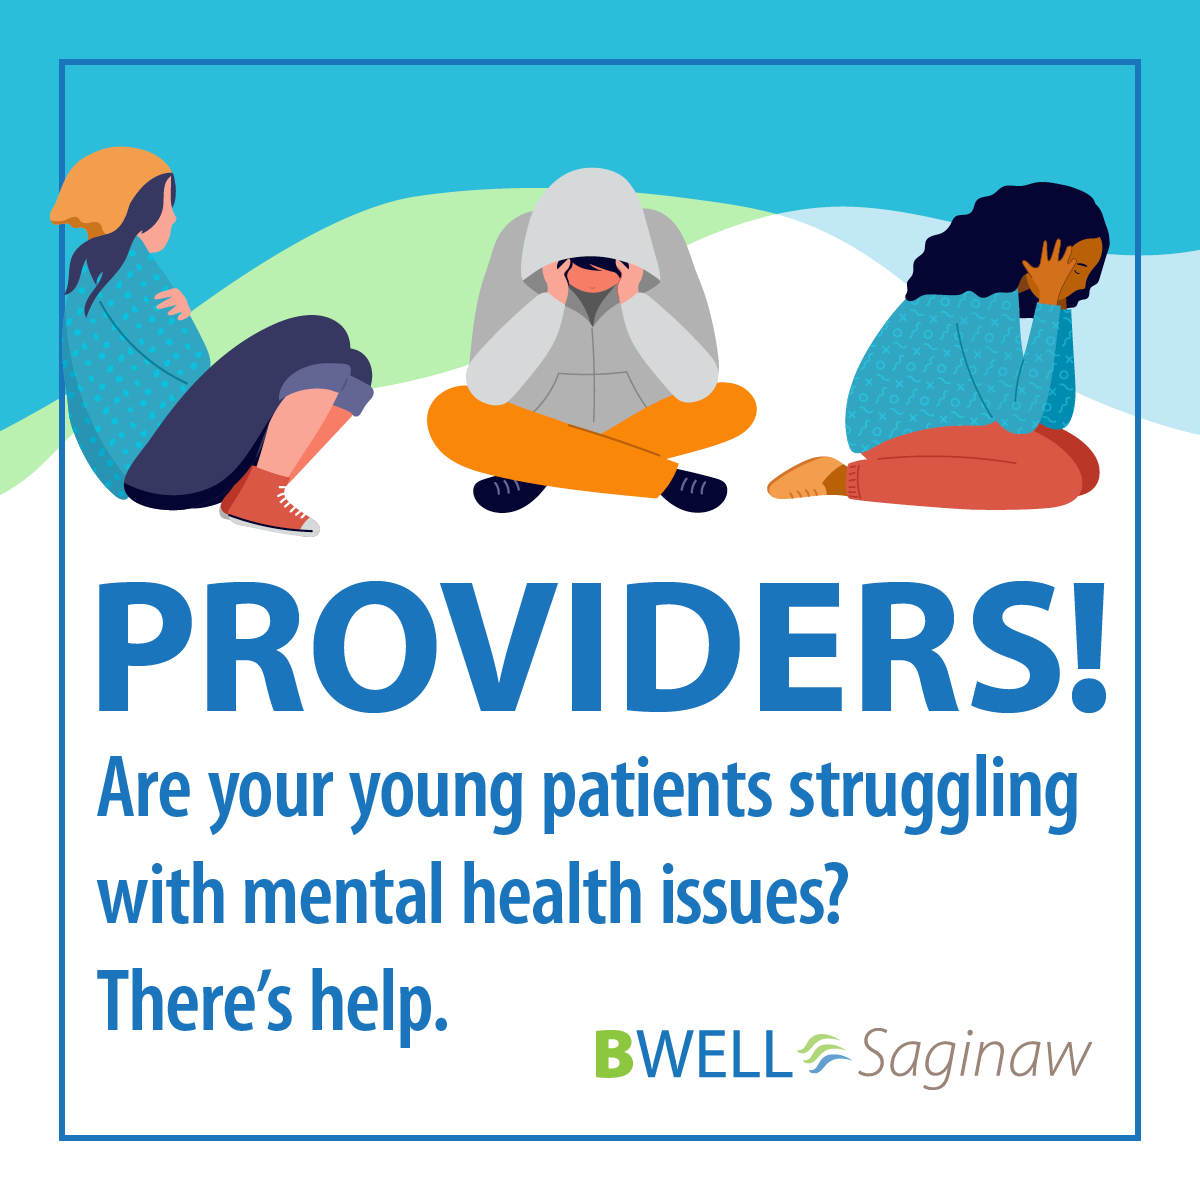 Are your young patients struggling with mental health issues? There’s help.